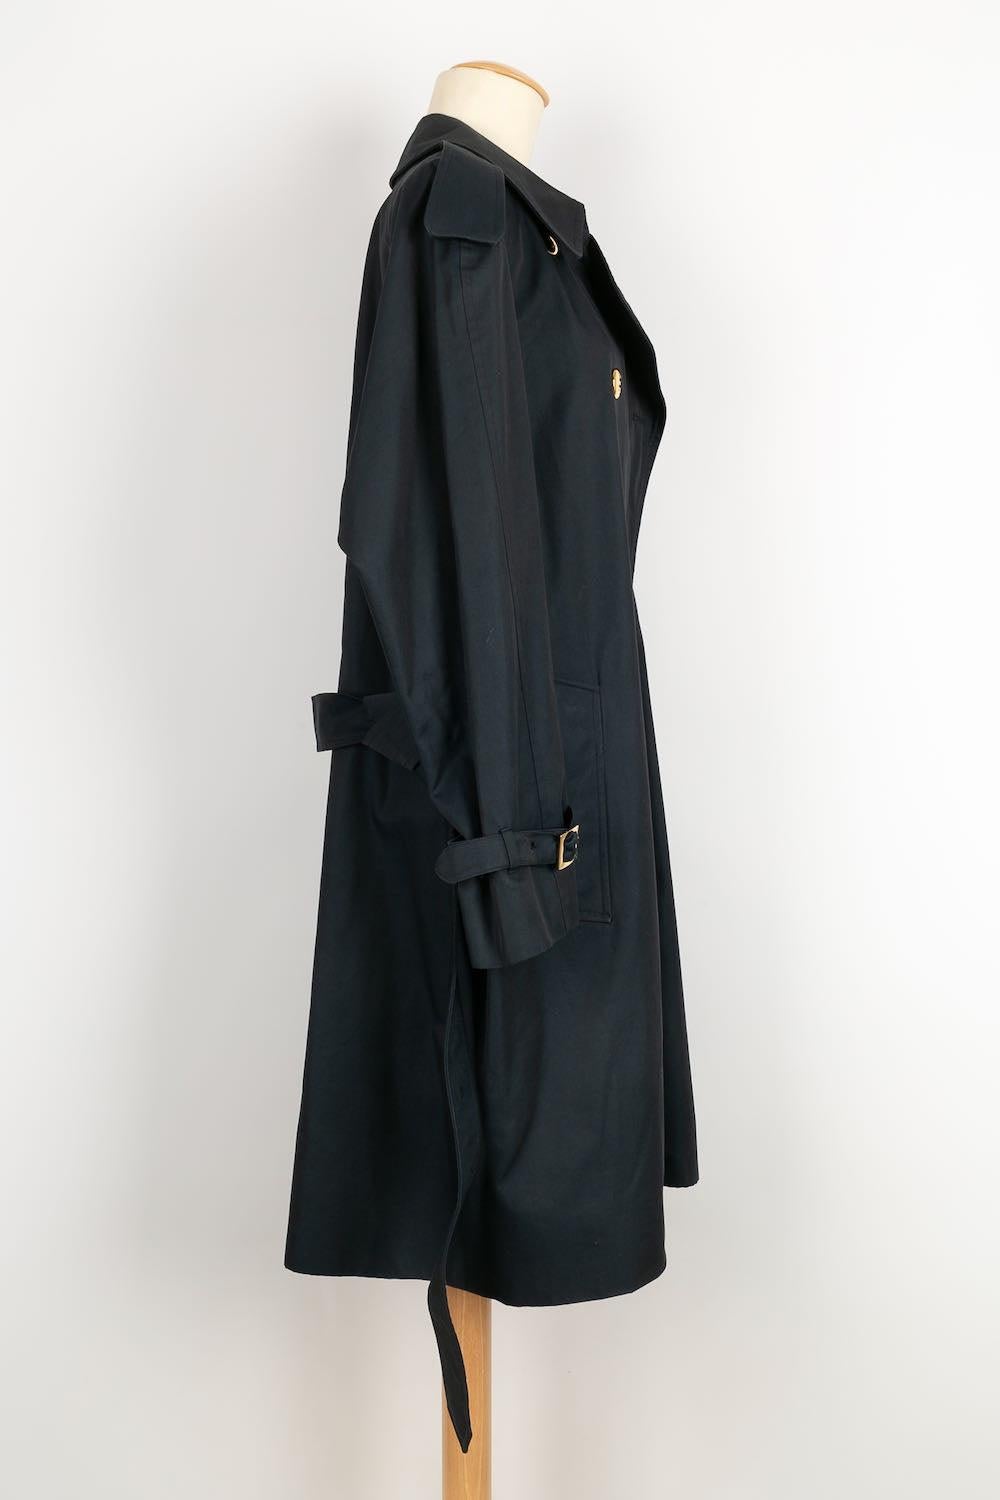 Black Christian Dior Navy Blue Trench Coat For Sale